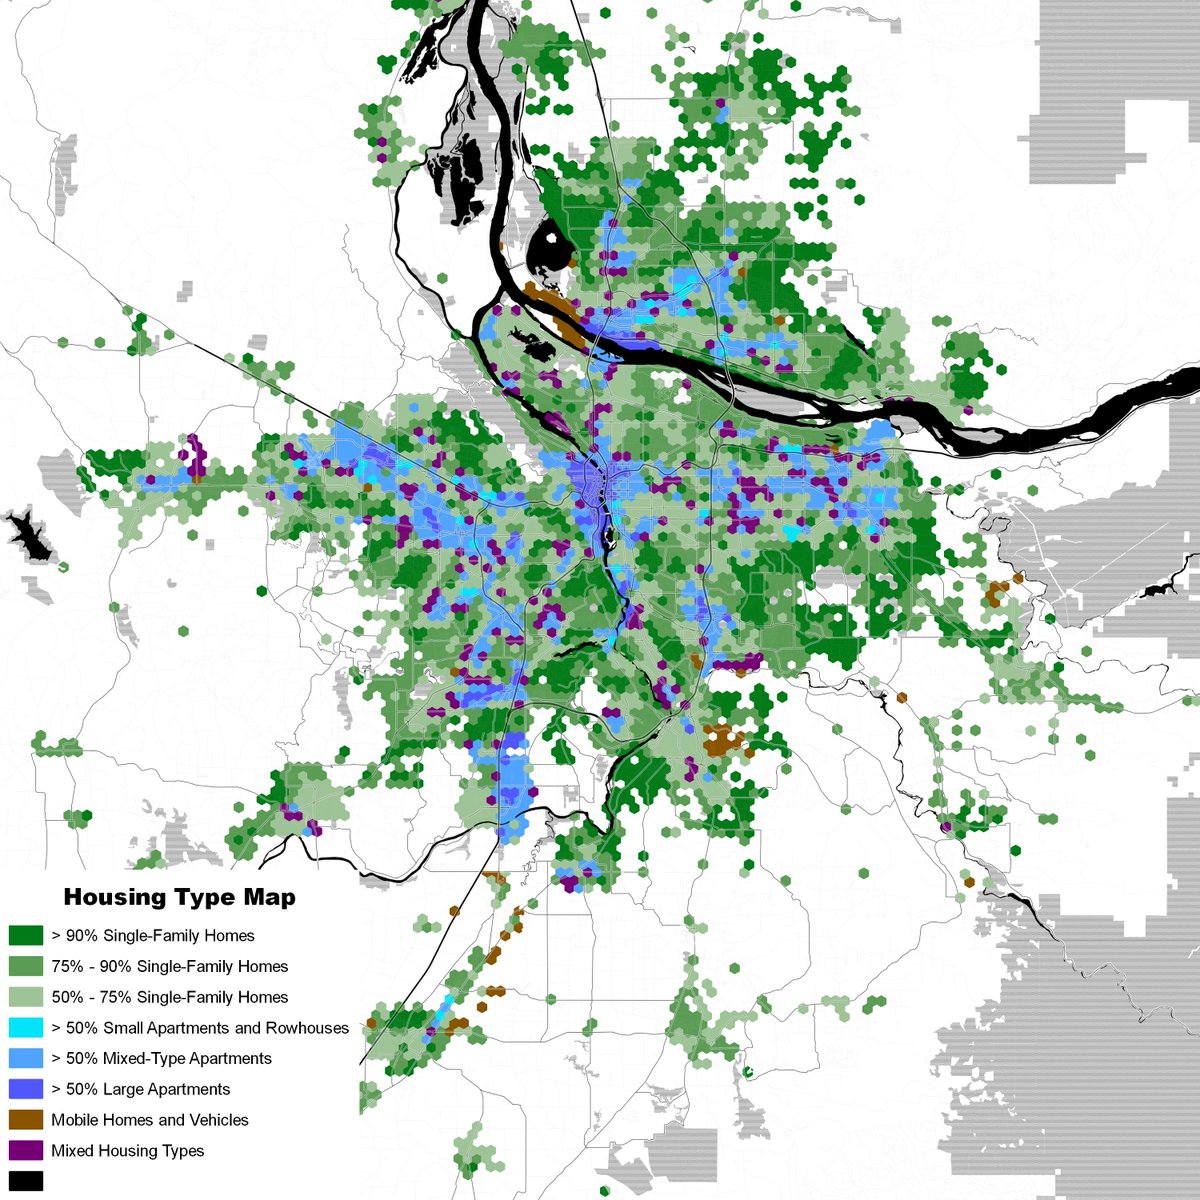 Heading north, we have Portland, which does well for a city of its size, but has a lot less in the way of walkable urbanism than you'd think given its reputation. cc  @surlyurbanist, who I should have tagged earlier i this thread.